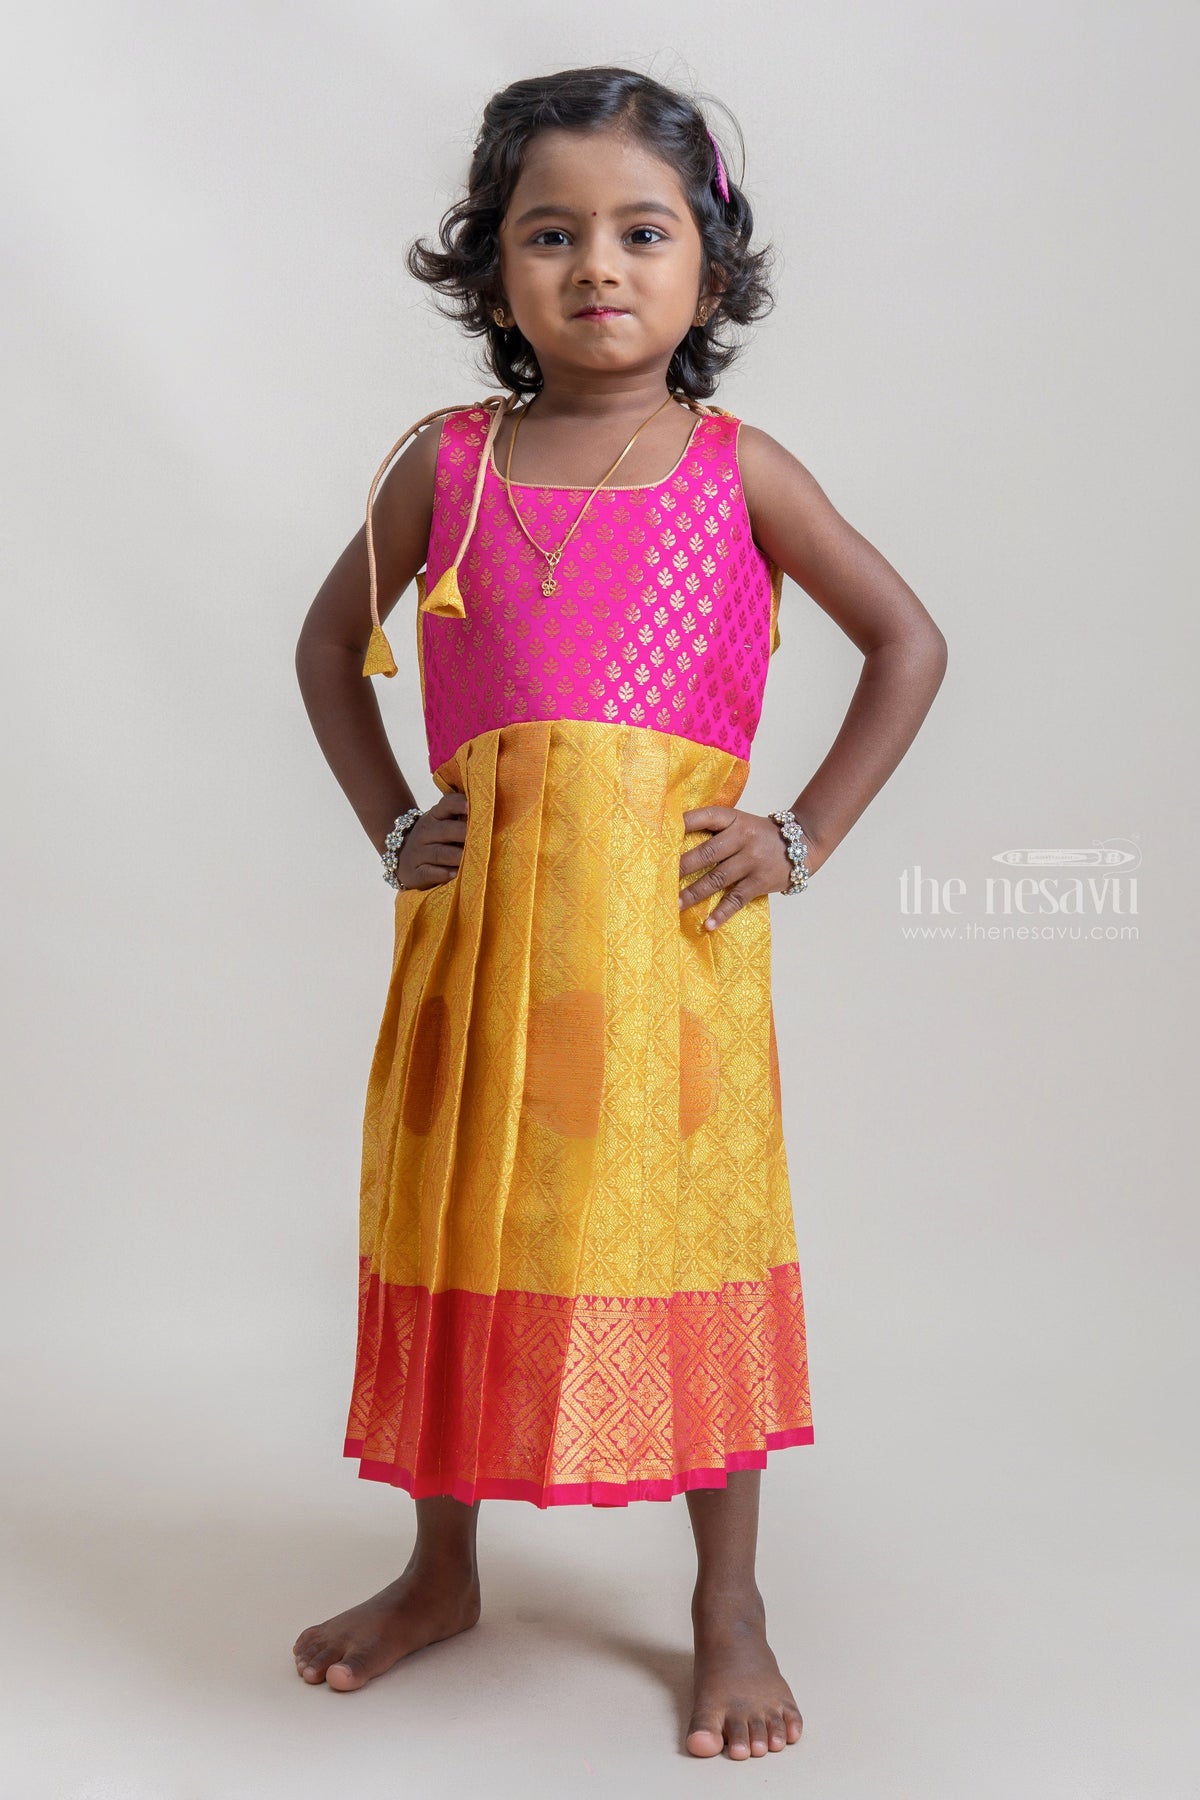 Diwali Baby Outfits - Latest Diwali Kids Dresses Collection 2022